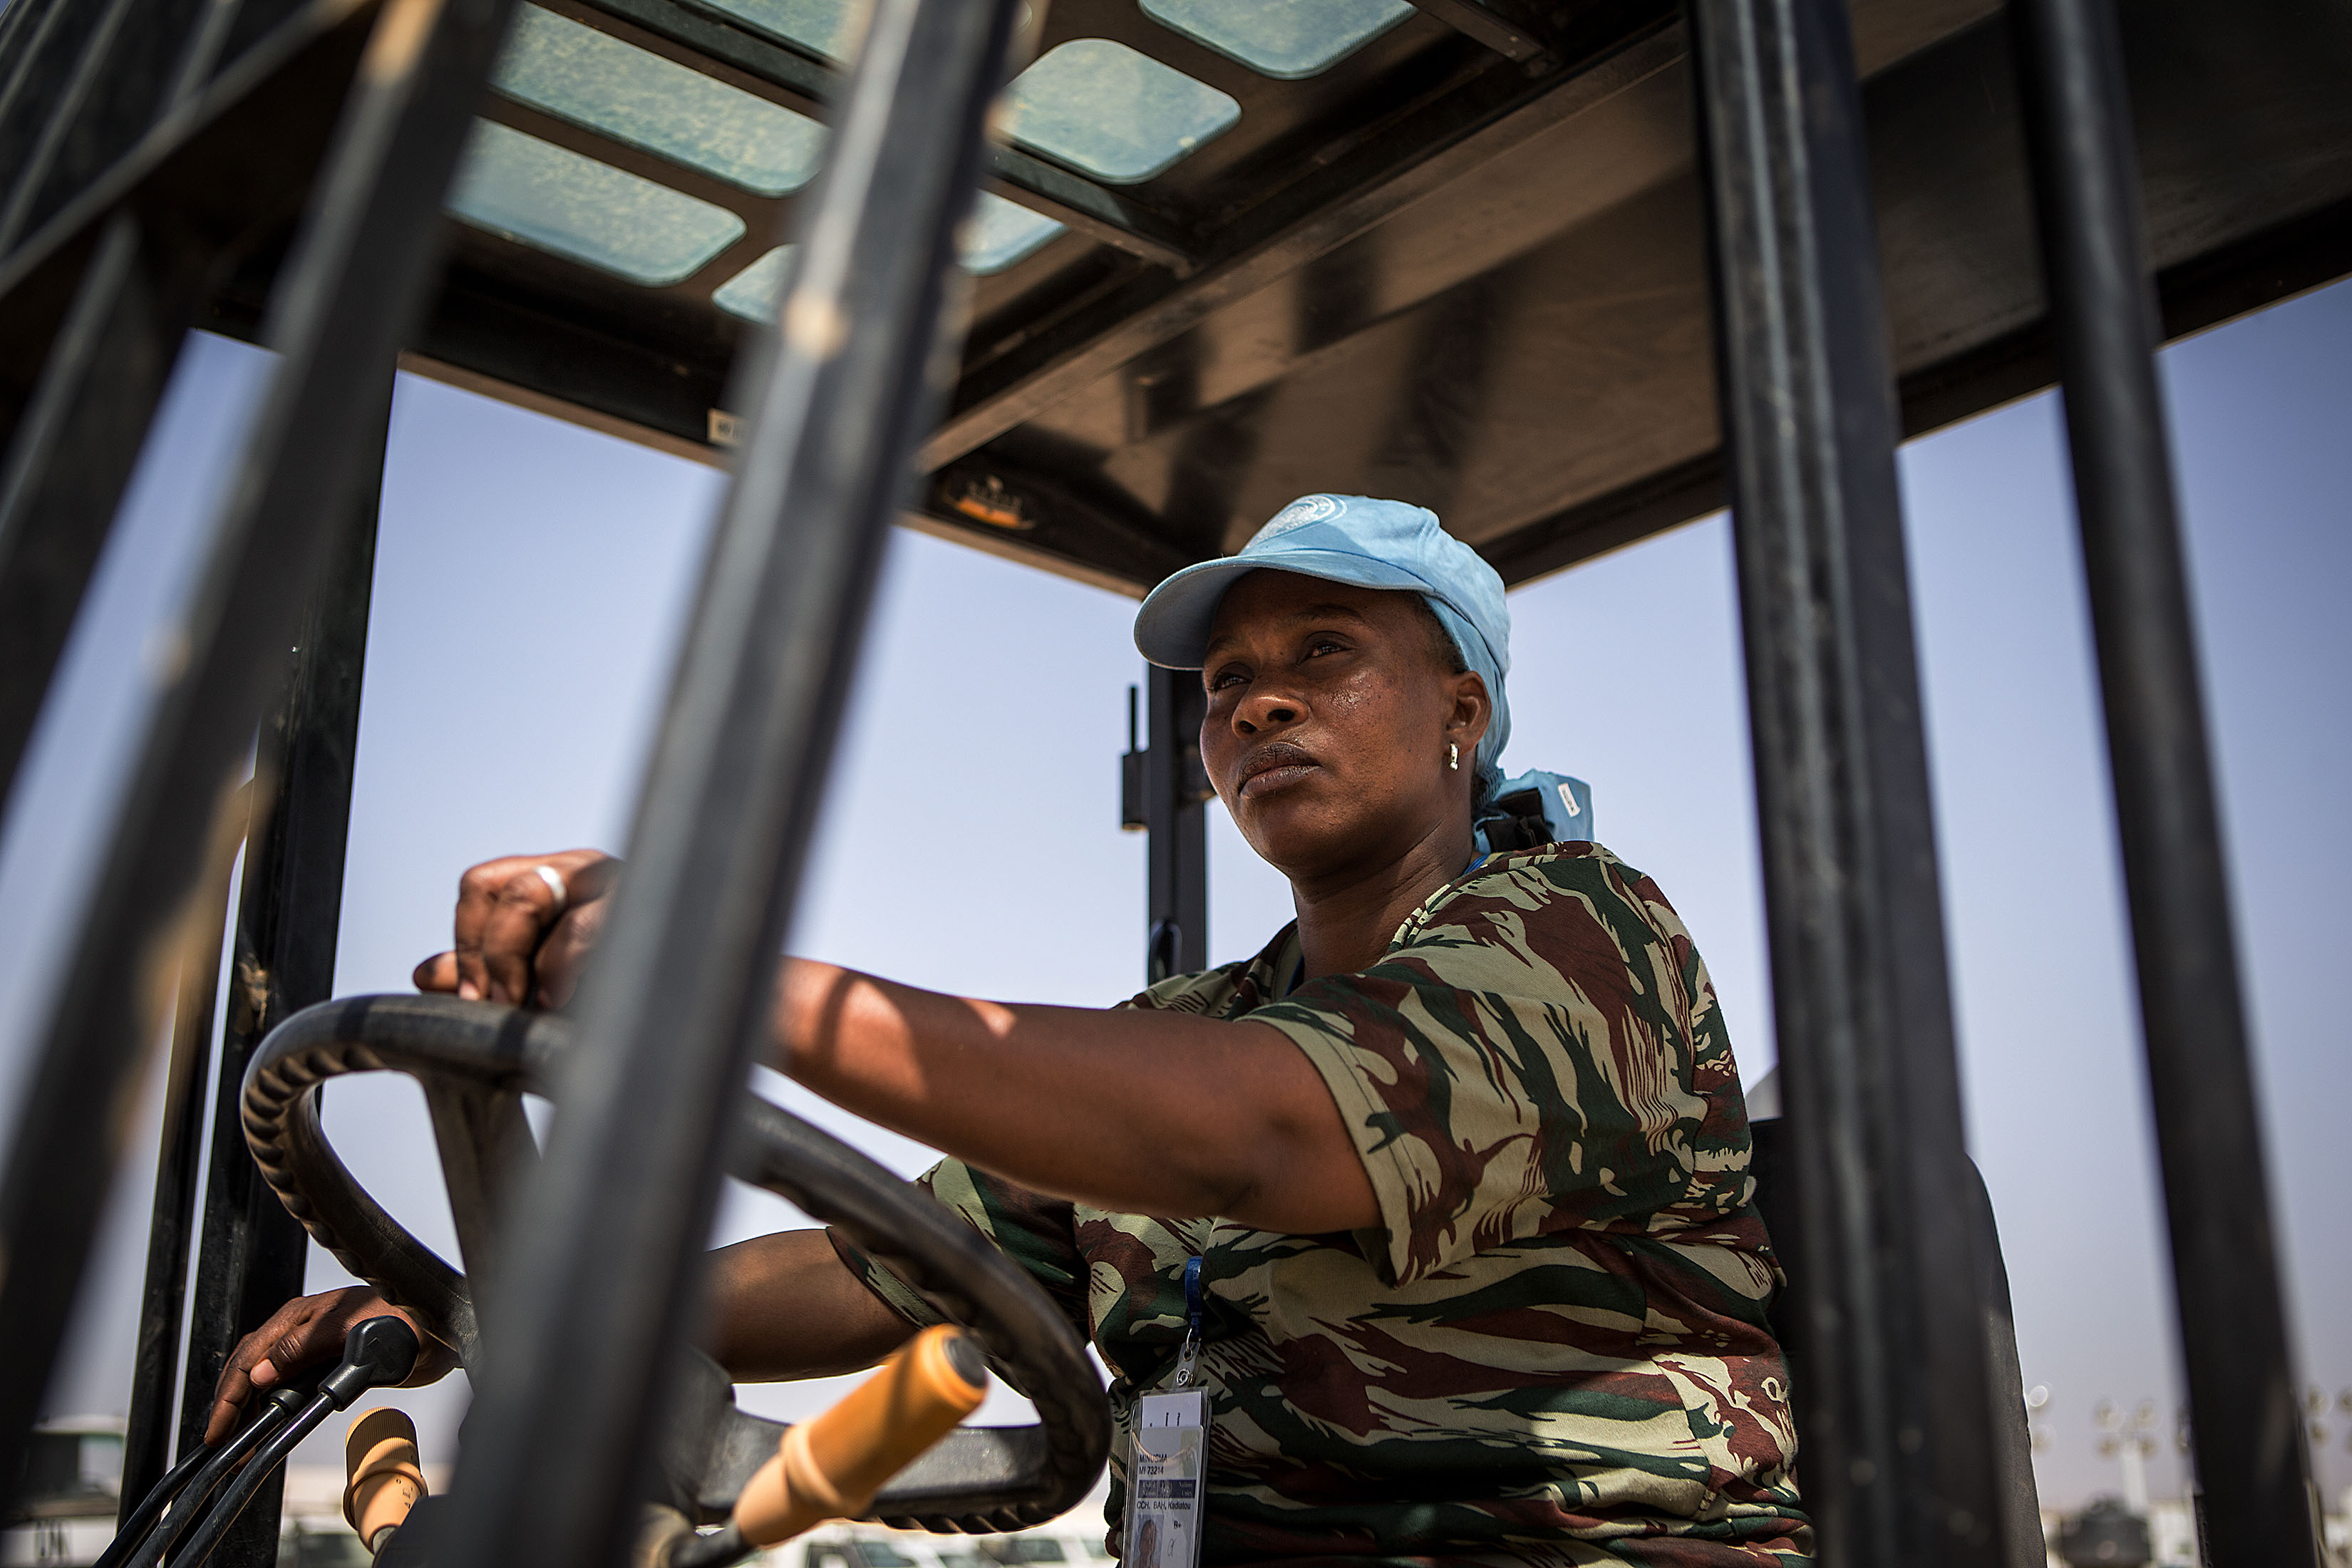 A peacekeeper on the UN base in Kida, Mali, where they ensure the security of the civilian population.